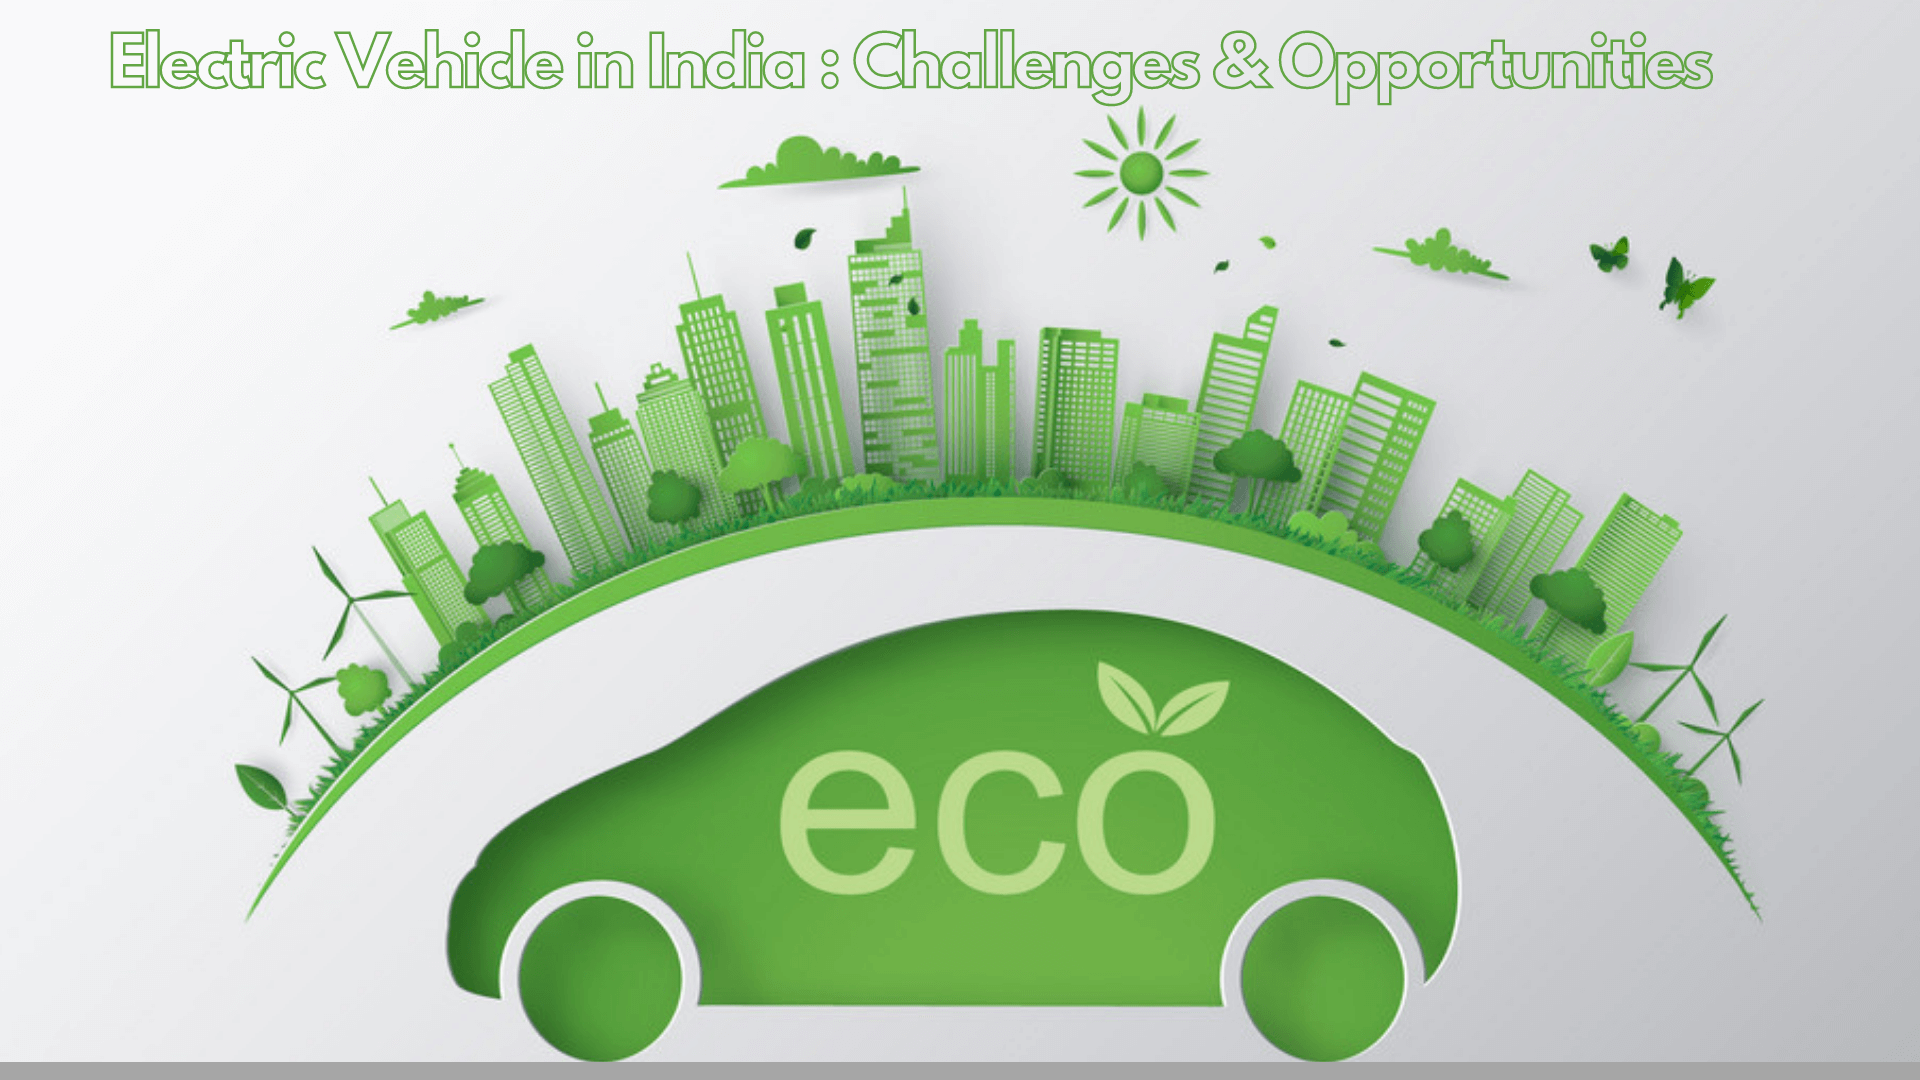 https://evzon.in/electric-vehicle-in-india-challenges-opportunities/